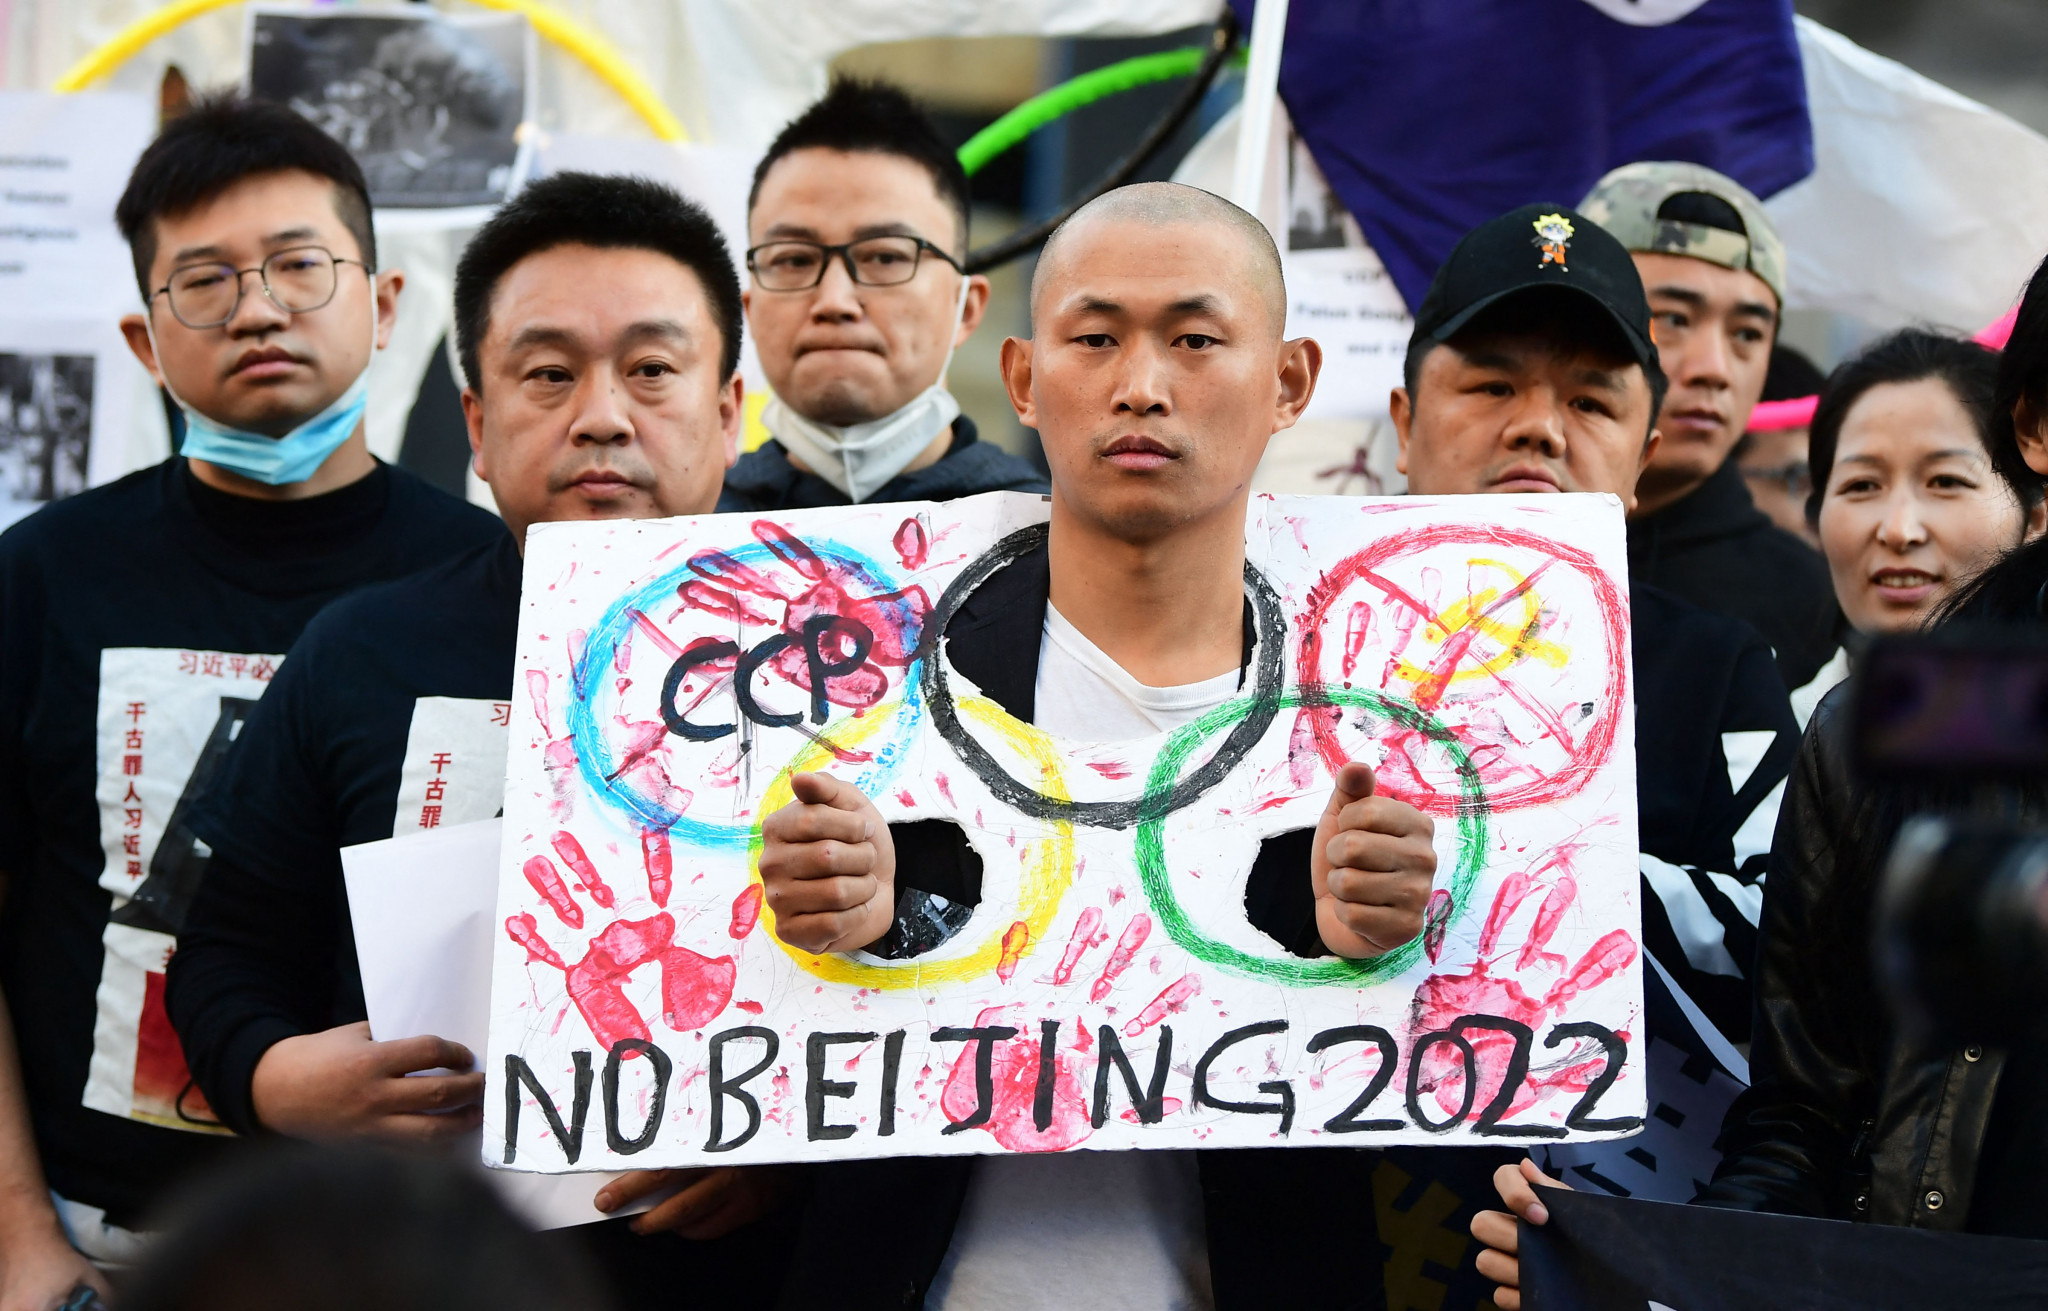 There have been widespread protests against the Beijing 2022 Olympics in the lead up to the Games ©Getty Images